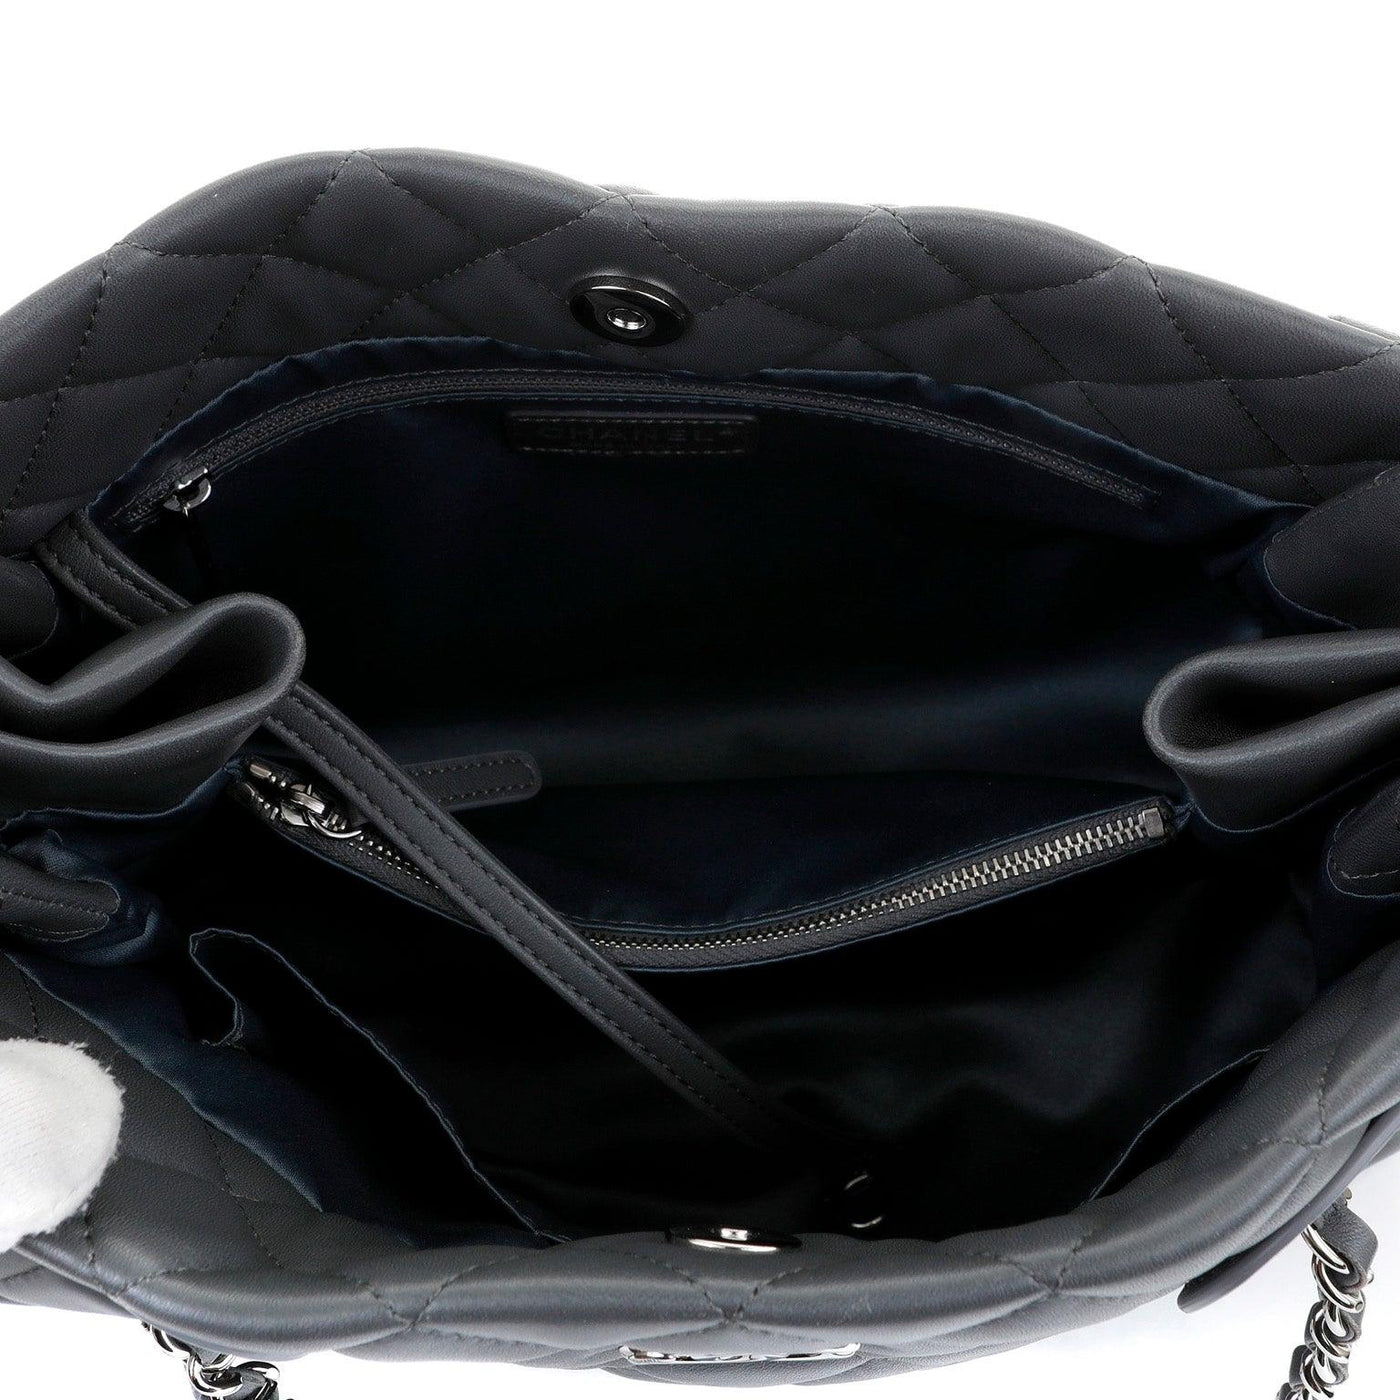 Chanel Graphite Lambskin Small Tote with Silver Hardware - Only Authentics